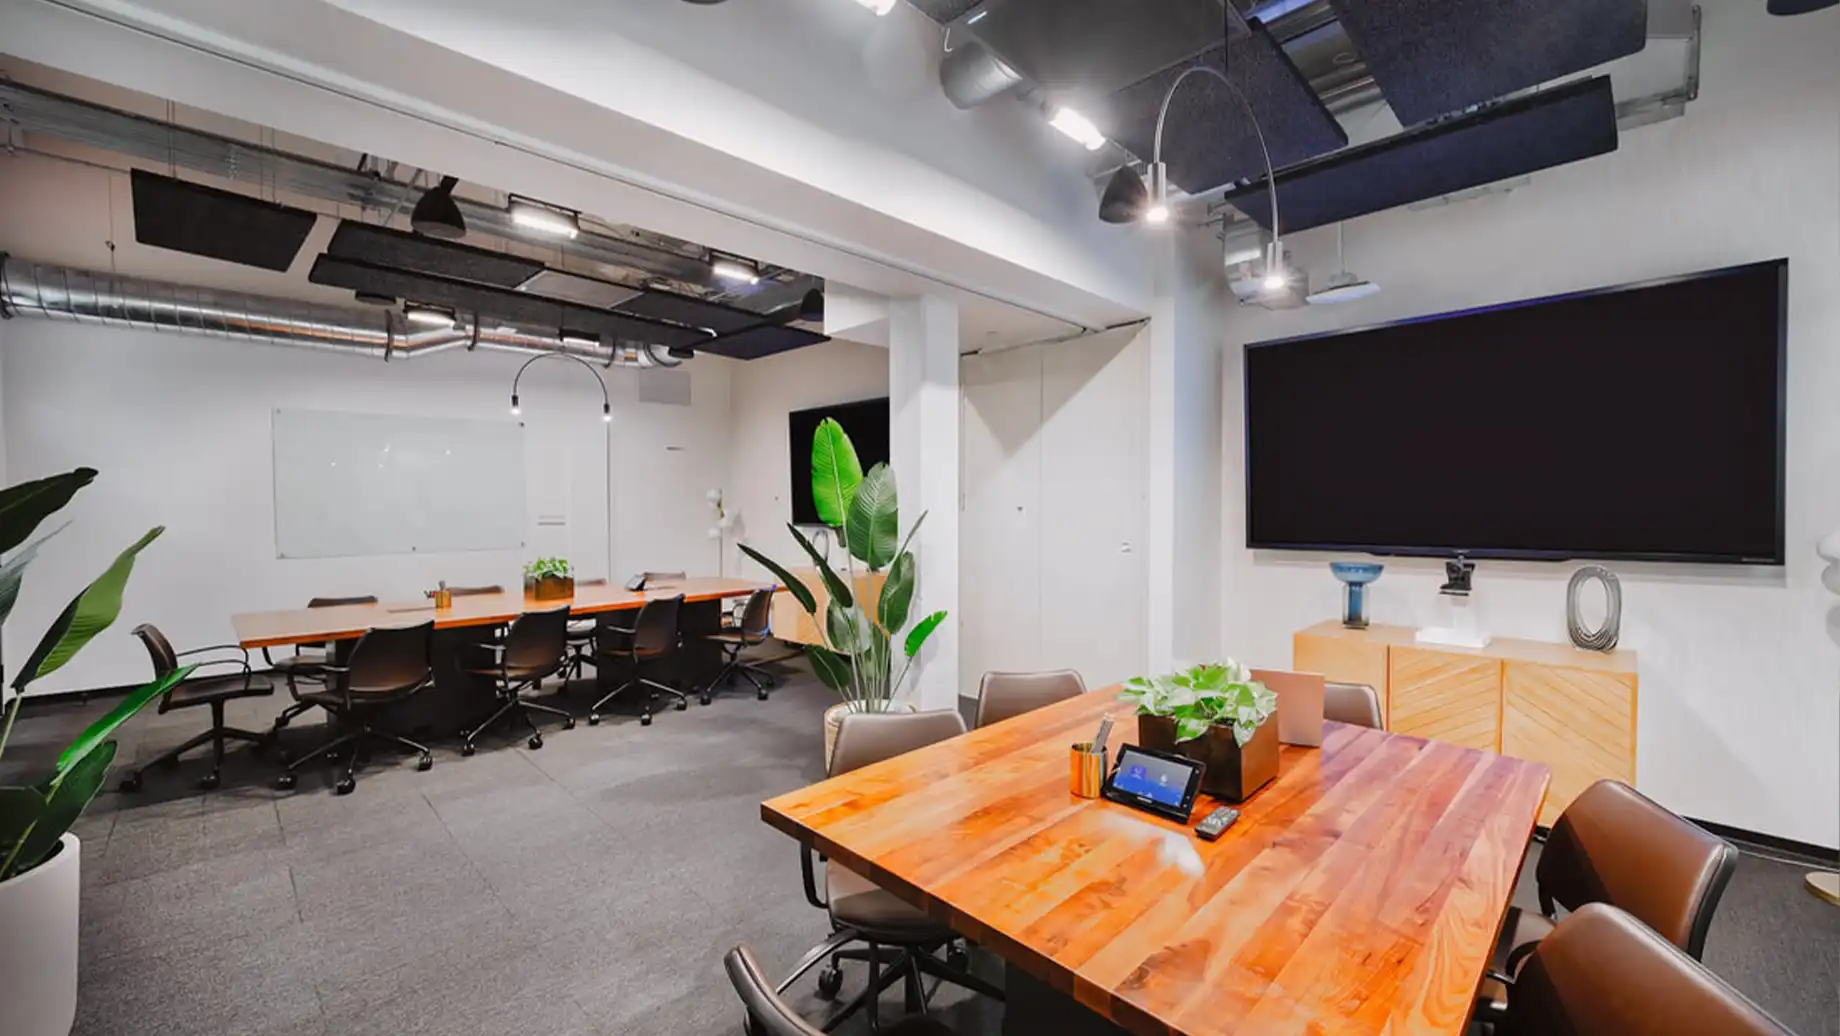 Team Room, The Gulch Nashville Private Office, Meeting Room & Coworking Space